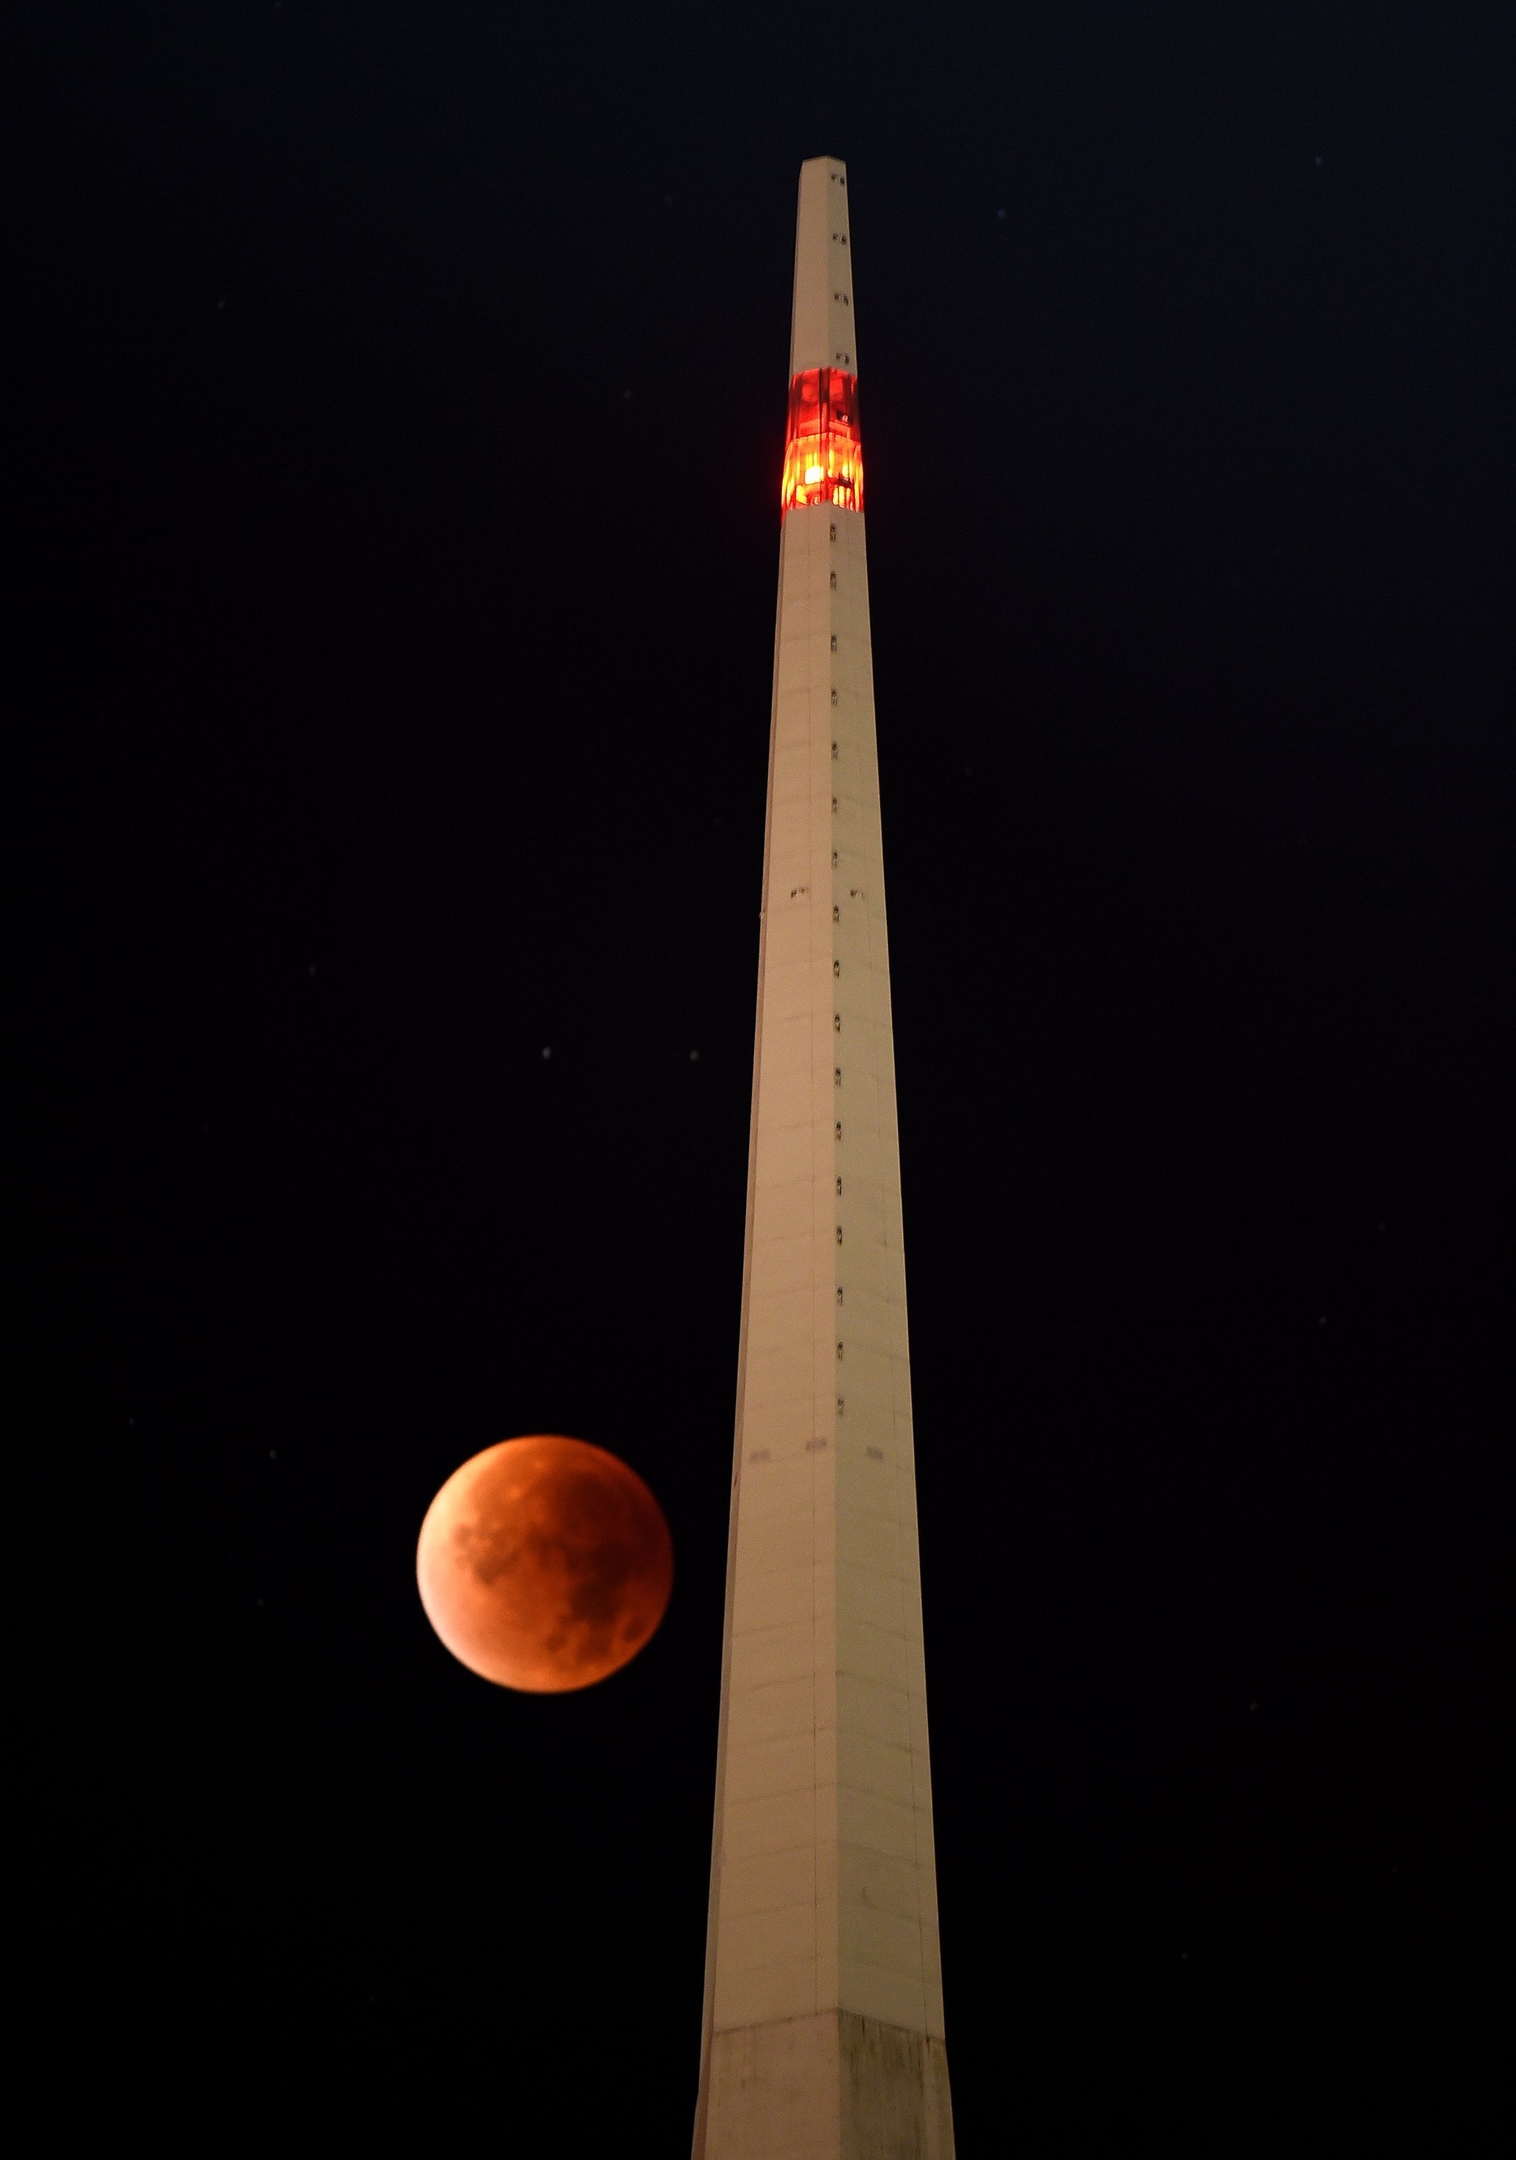 A blood red "supermoon" in the skies by the Spinnaker Tower, Portsmouth